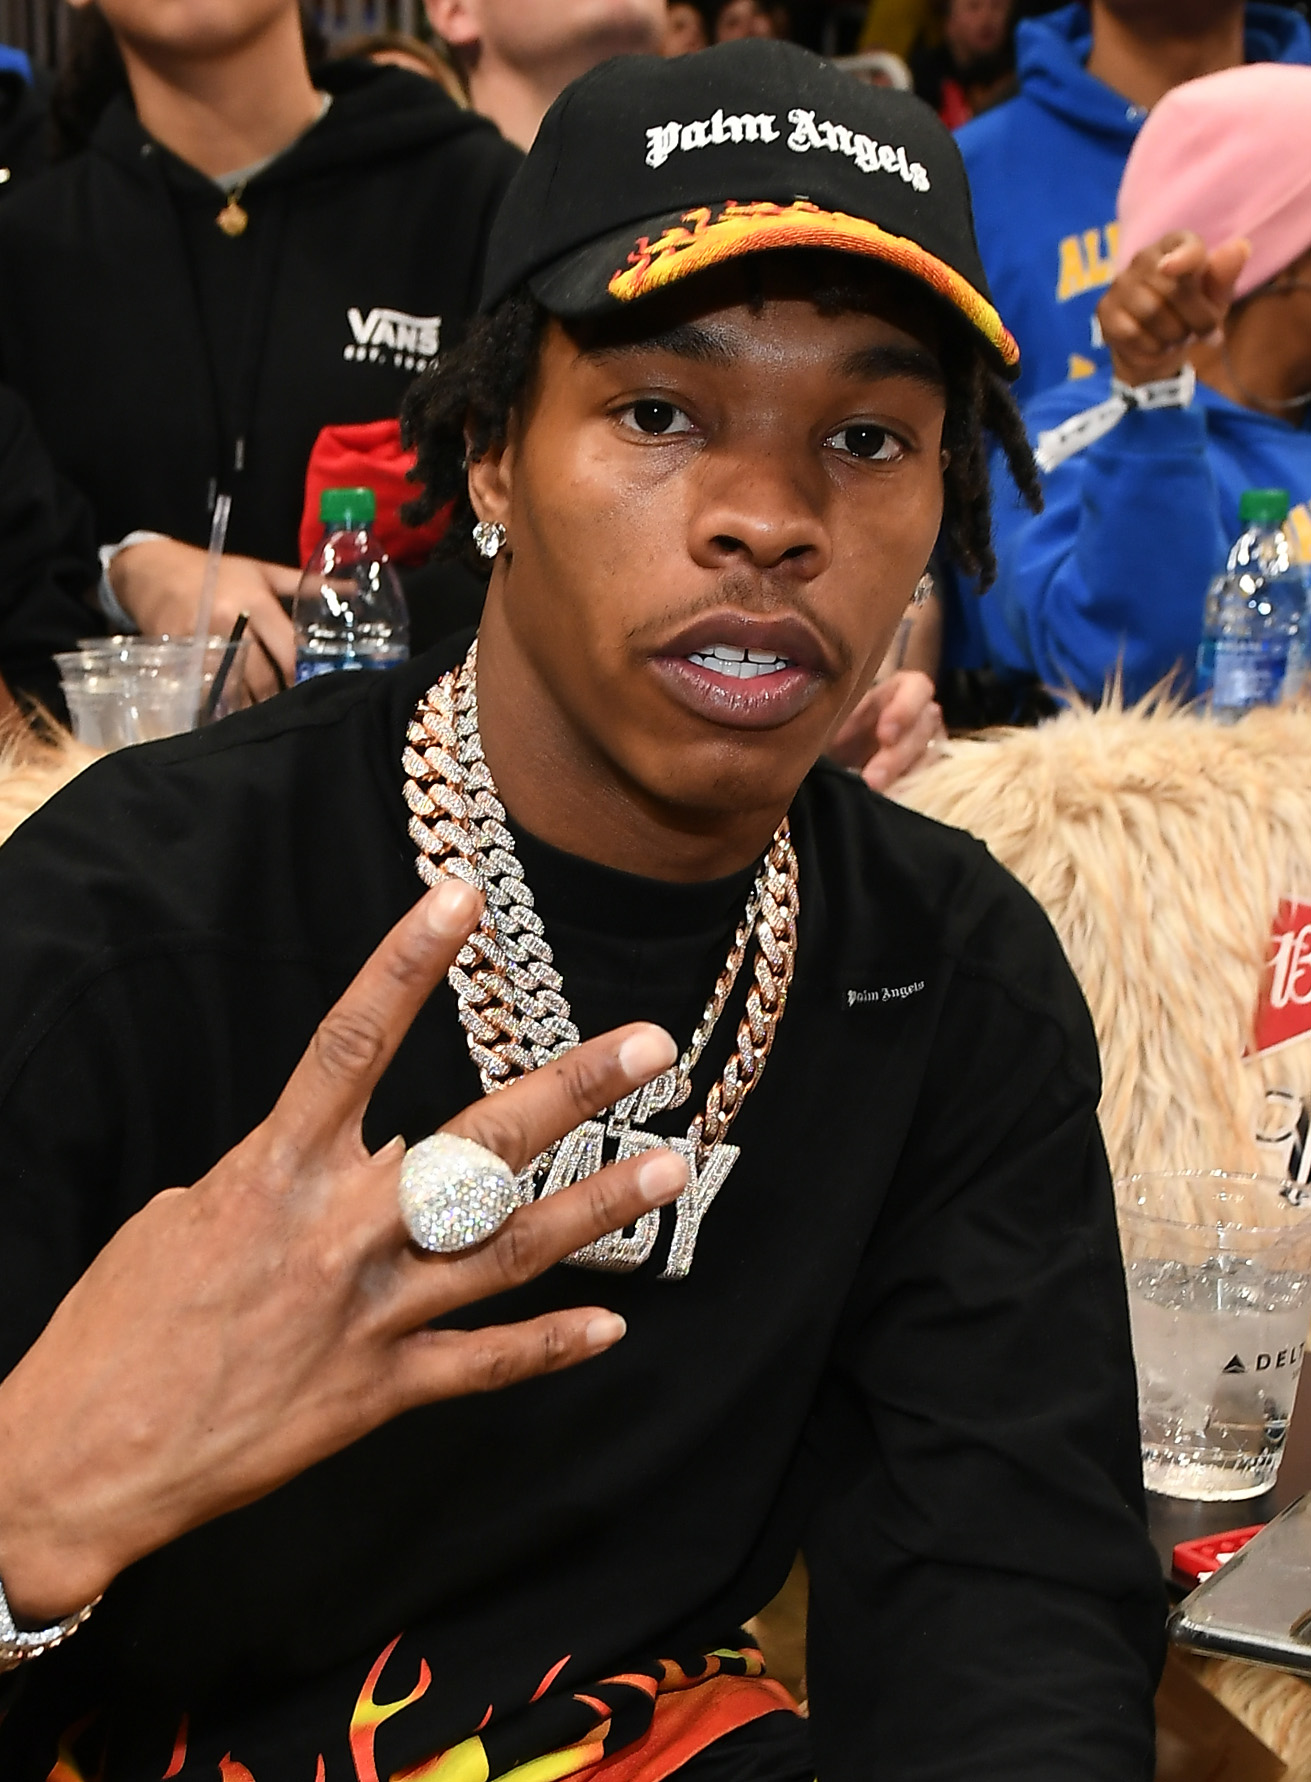 Lil Baby Says He's Not Interested in Politics, Despite Getting Involved